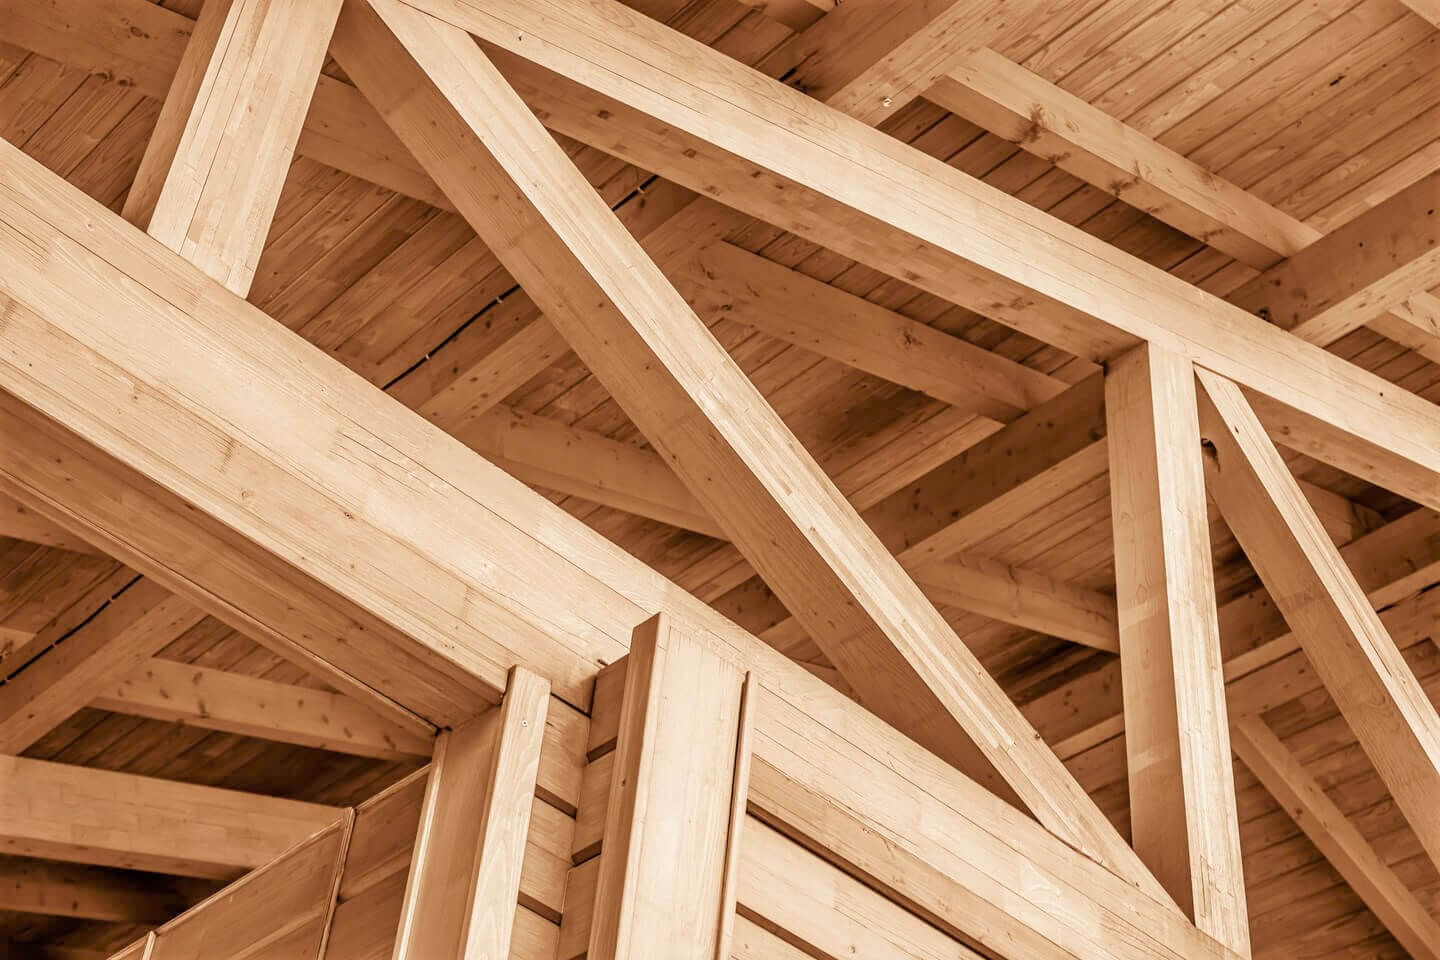 The construction of the wooden roof